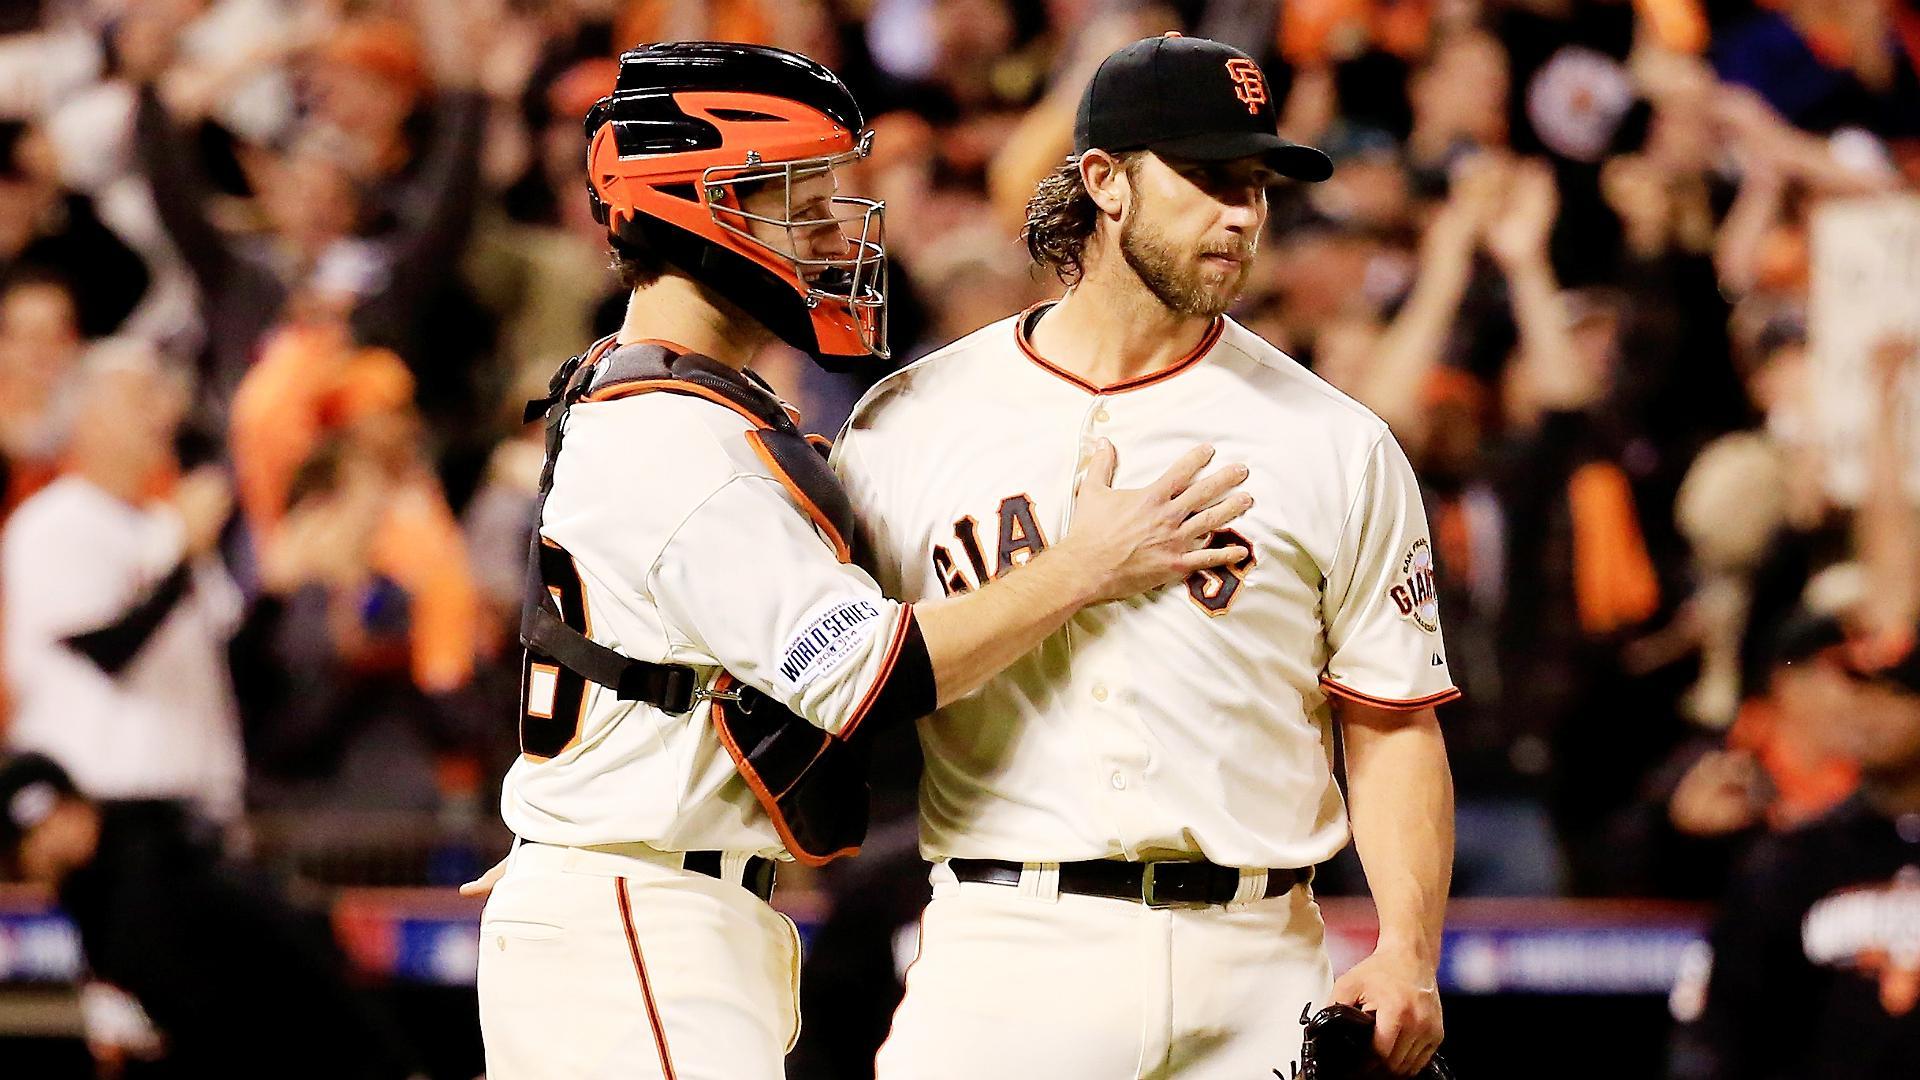 How could Giants' bullpen possibly be better? Add Bumgarner to mix